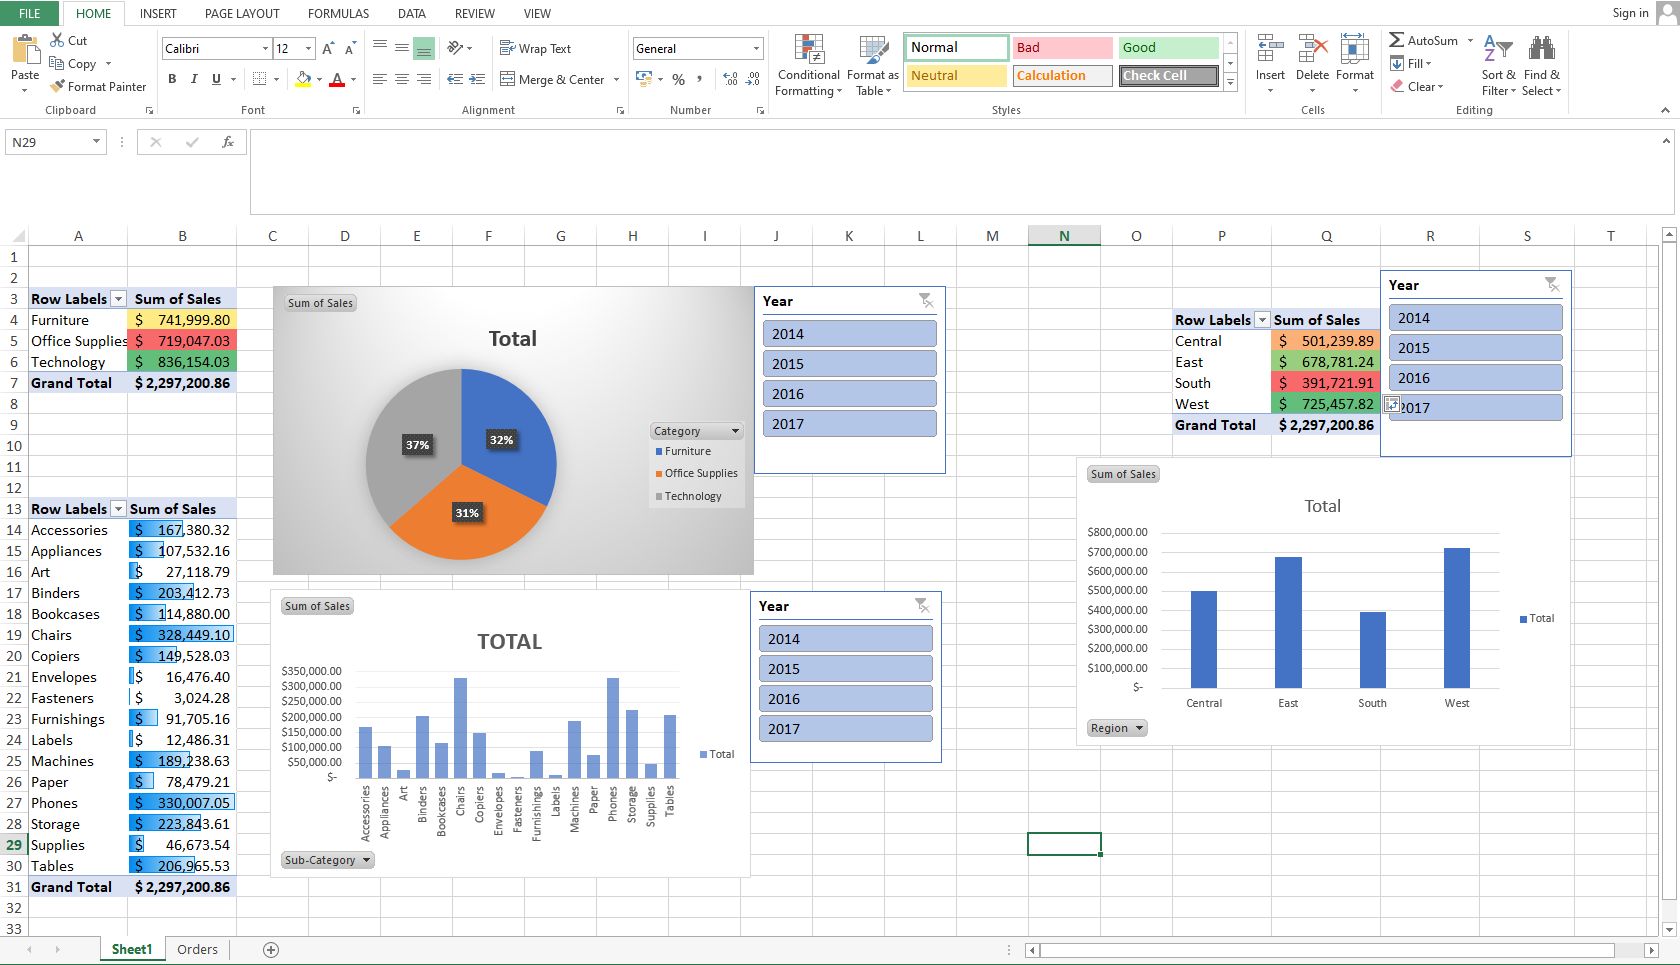 How to Analyze and Visualize Large Datasets with Microsoft Excel Using Pivot Tables and Charts